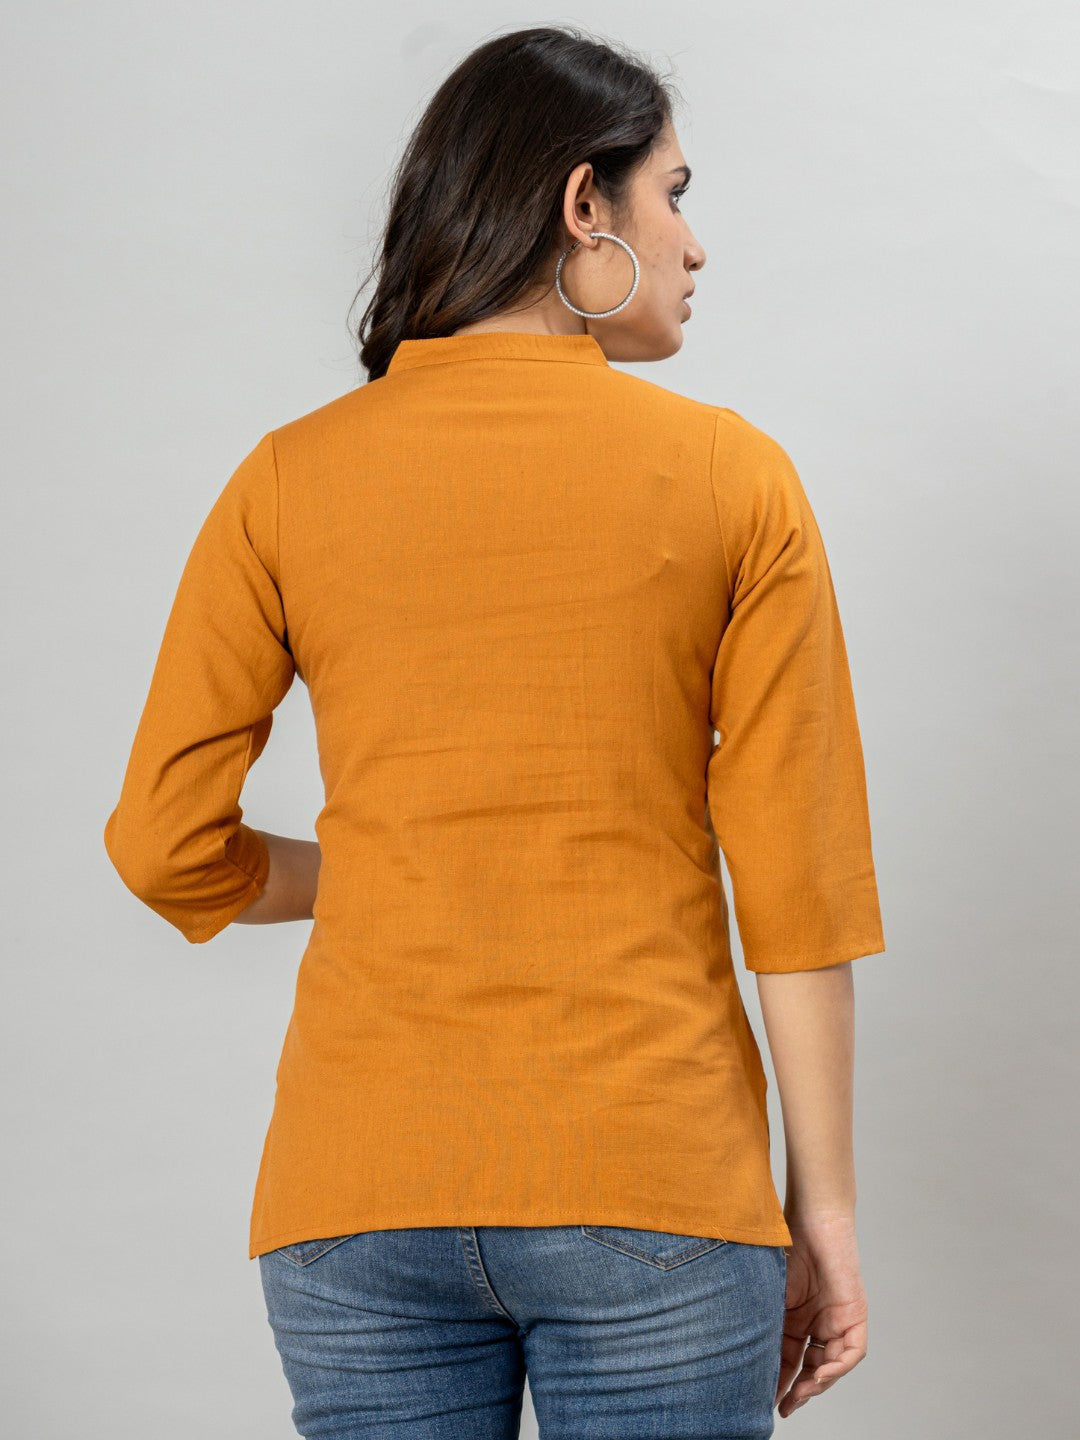 Solid Cotton Flax Women Top - Mustard